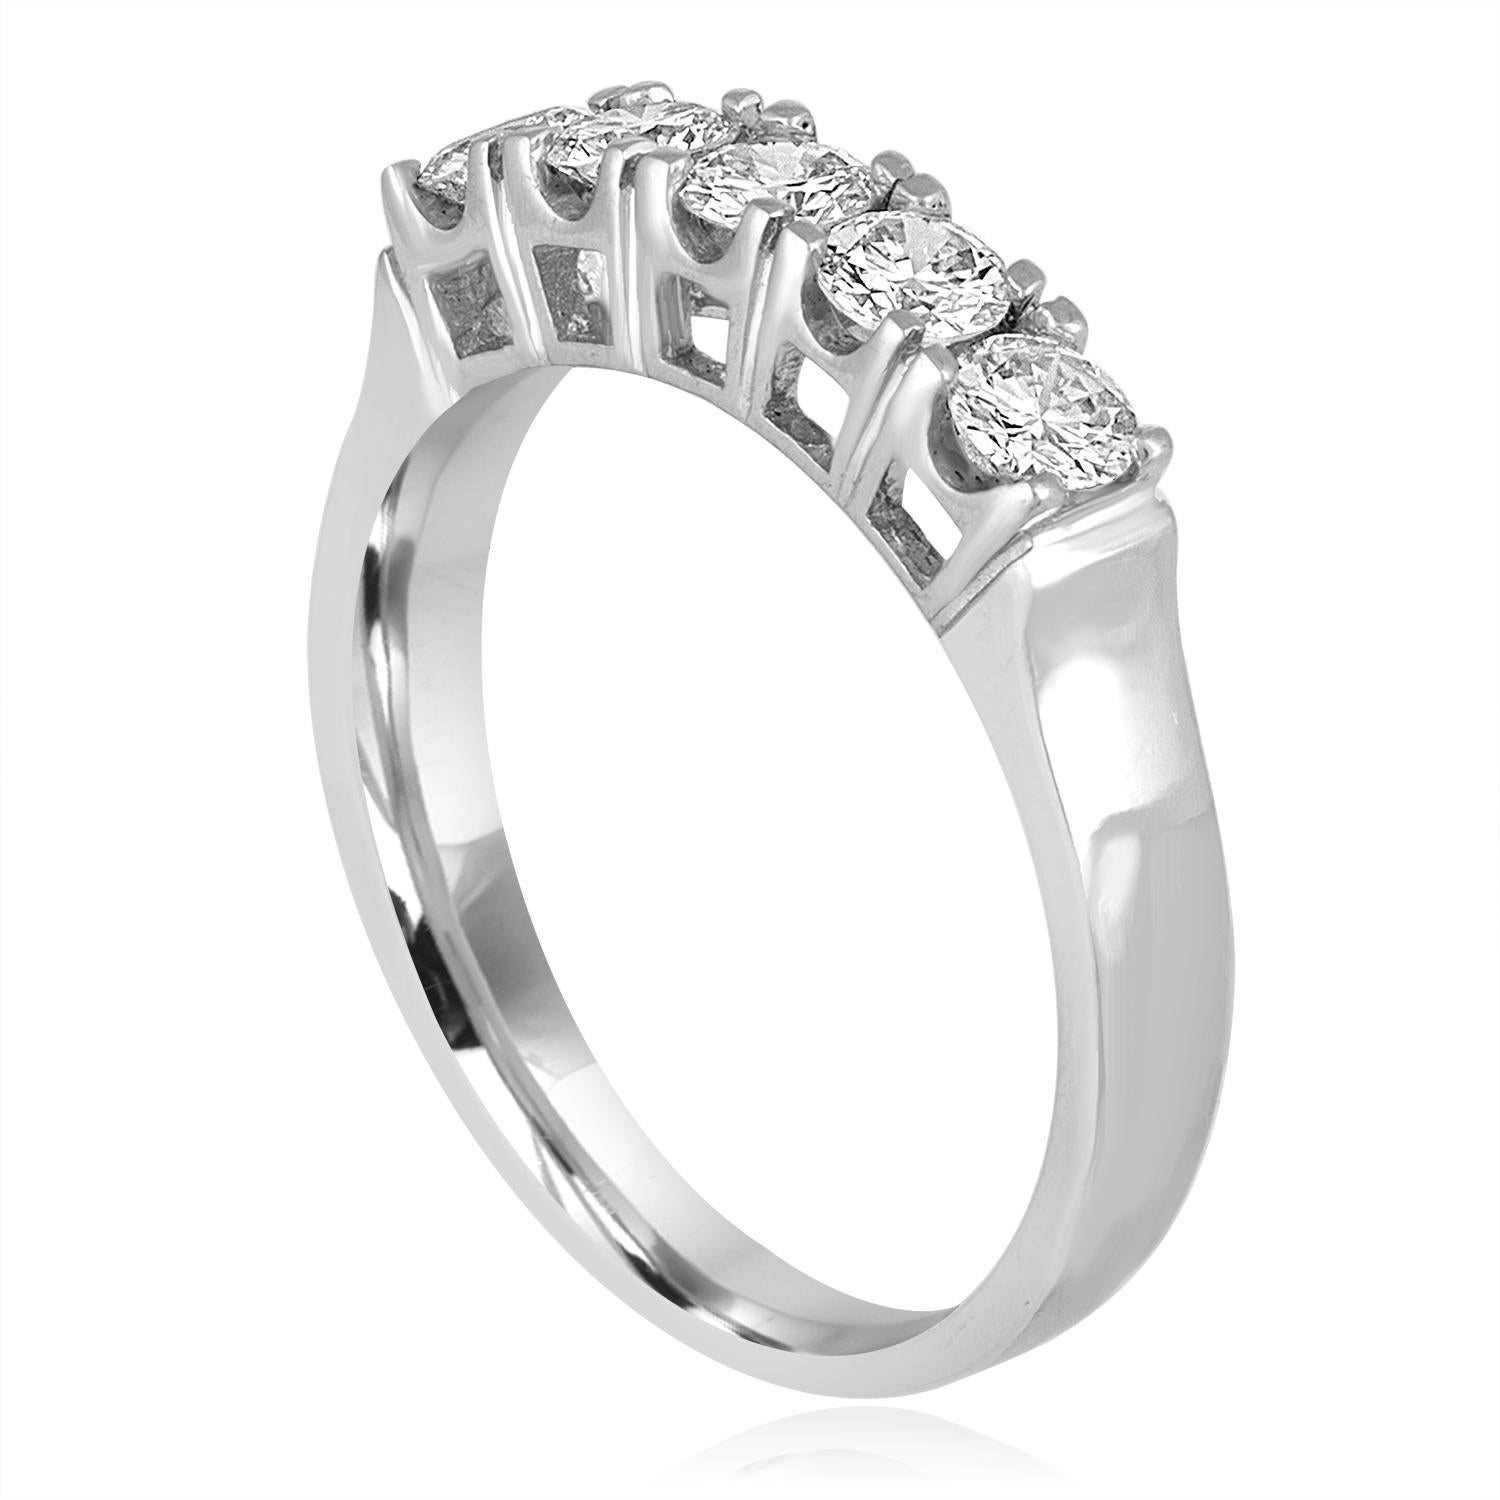 Very Beautiful Half Diamond Band Ring
The ring is 14K White Gold
There are 5 Round Cut Diamonds prong set
There are 0.57 Carats In Diamonds G/H VS
The ring is a size 6.25, sizable. 
The band is 3.53 mm wide and tapers down to 2.54mm.
The ring weighs